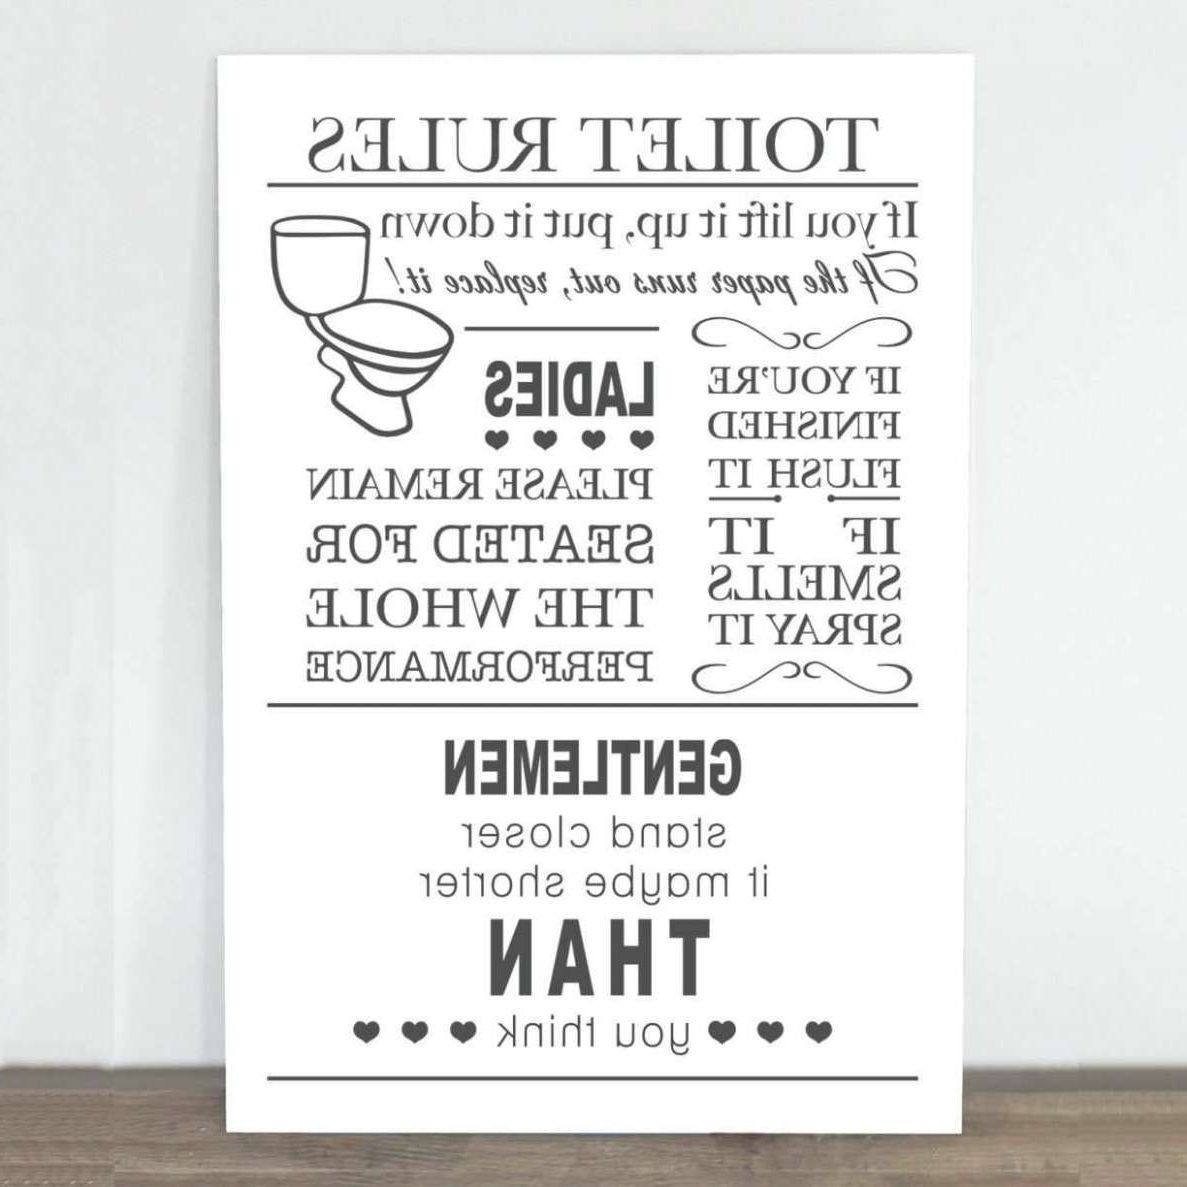 Featured Photo of Bathroom Rules Wall Art